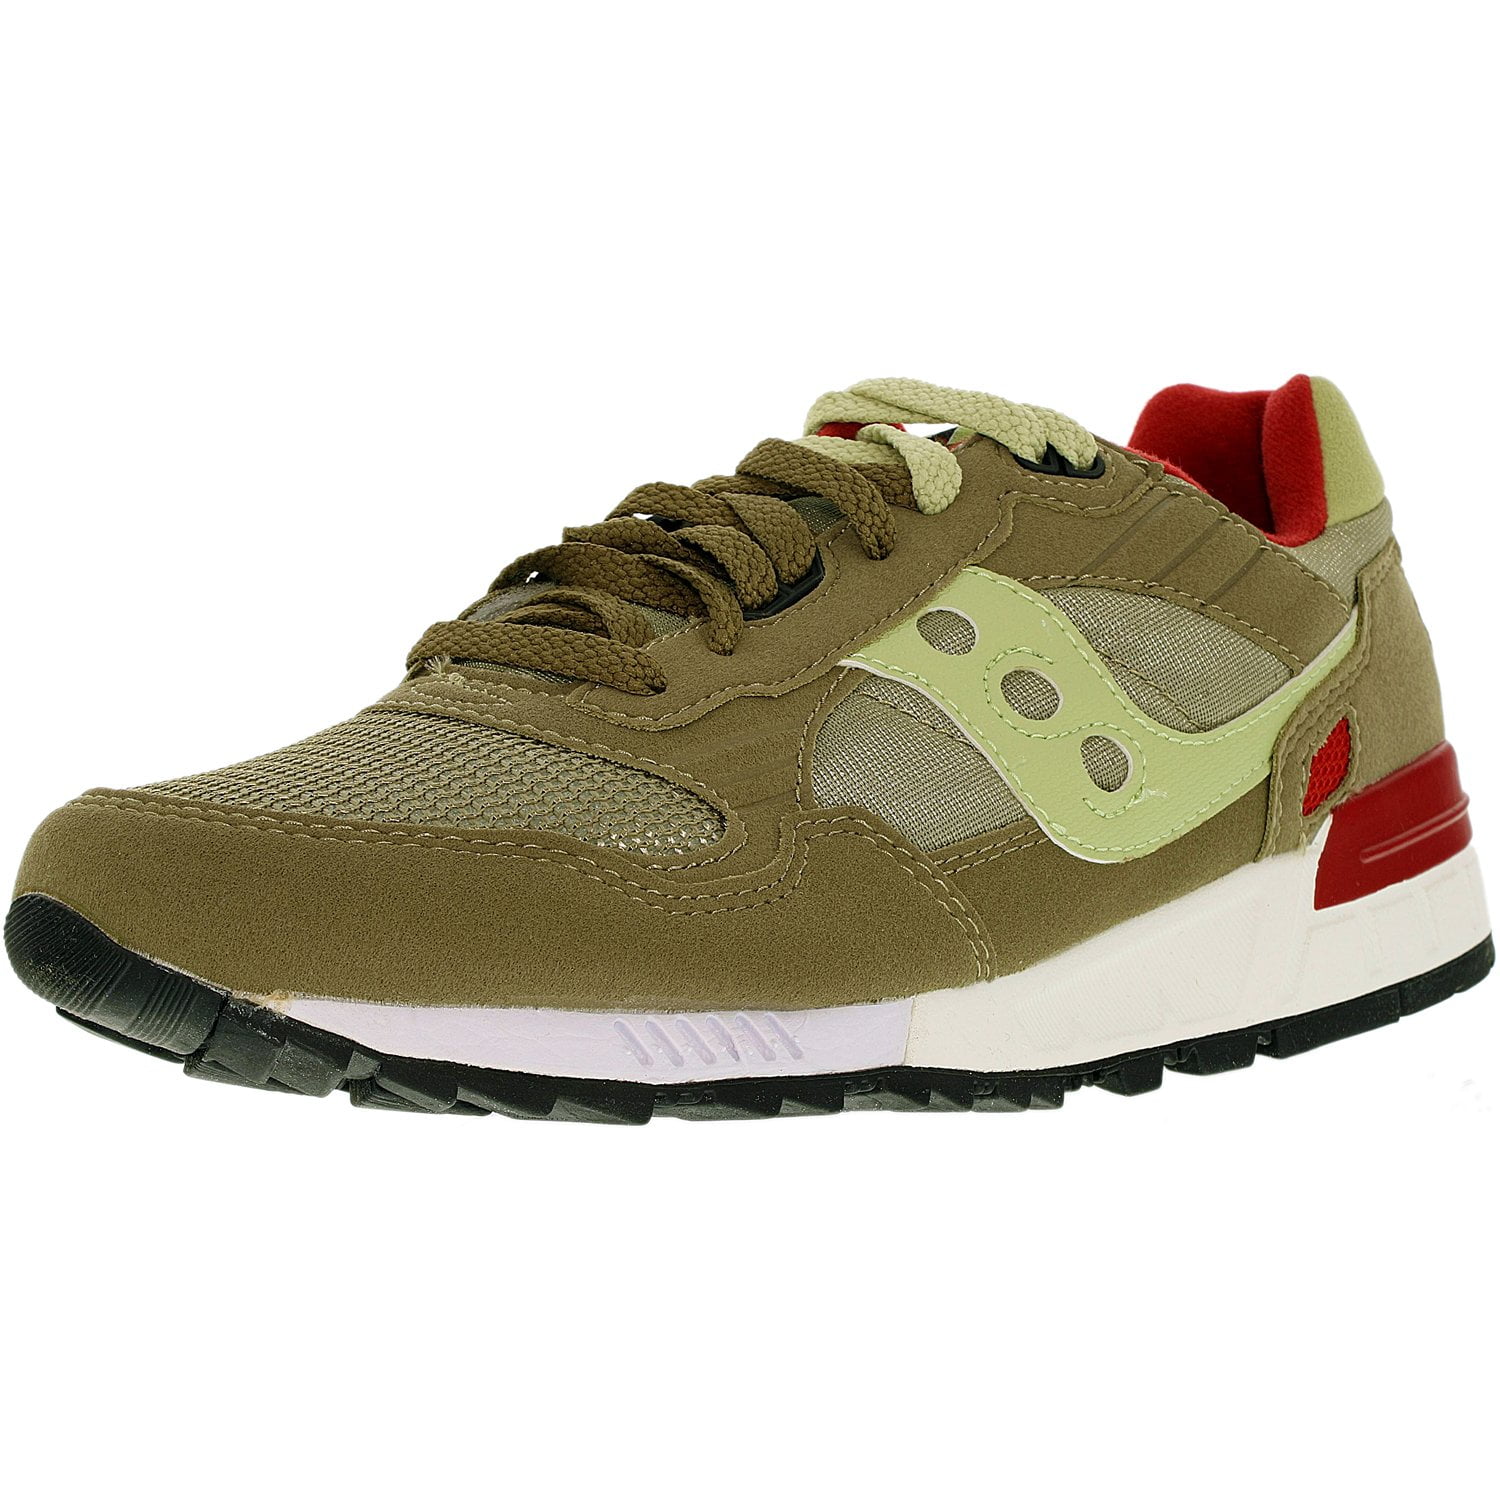 Saucony - Saucony Men's Shadow 5000 Olive Ankle-High Fashion Sneaker ...